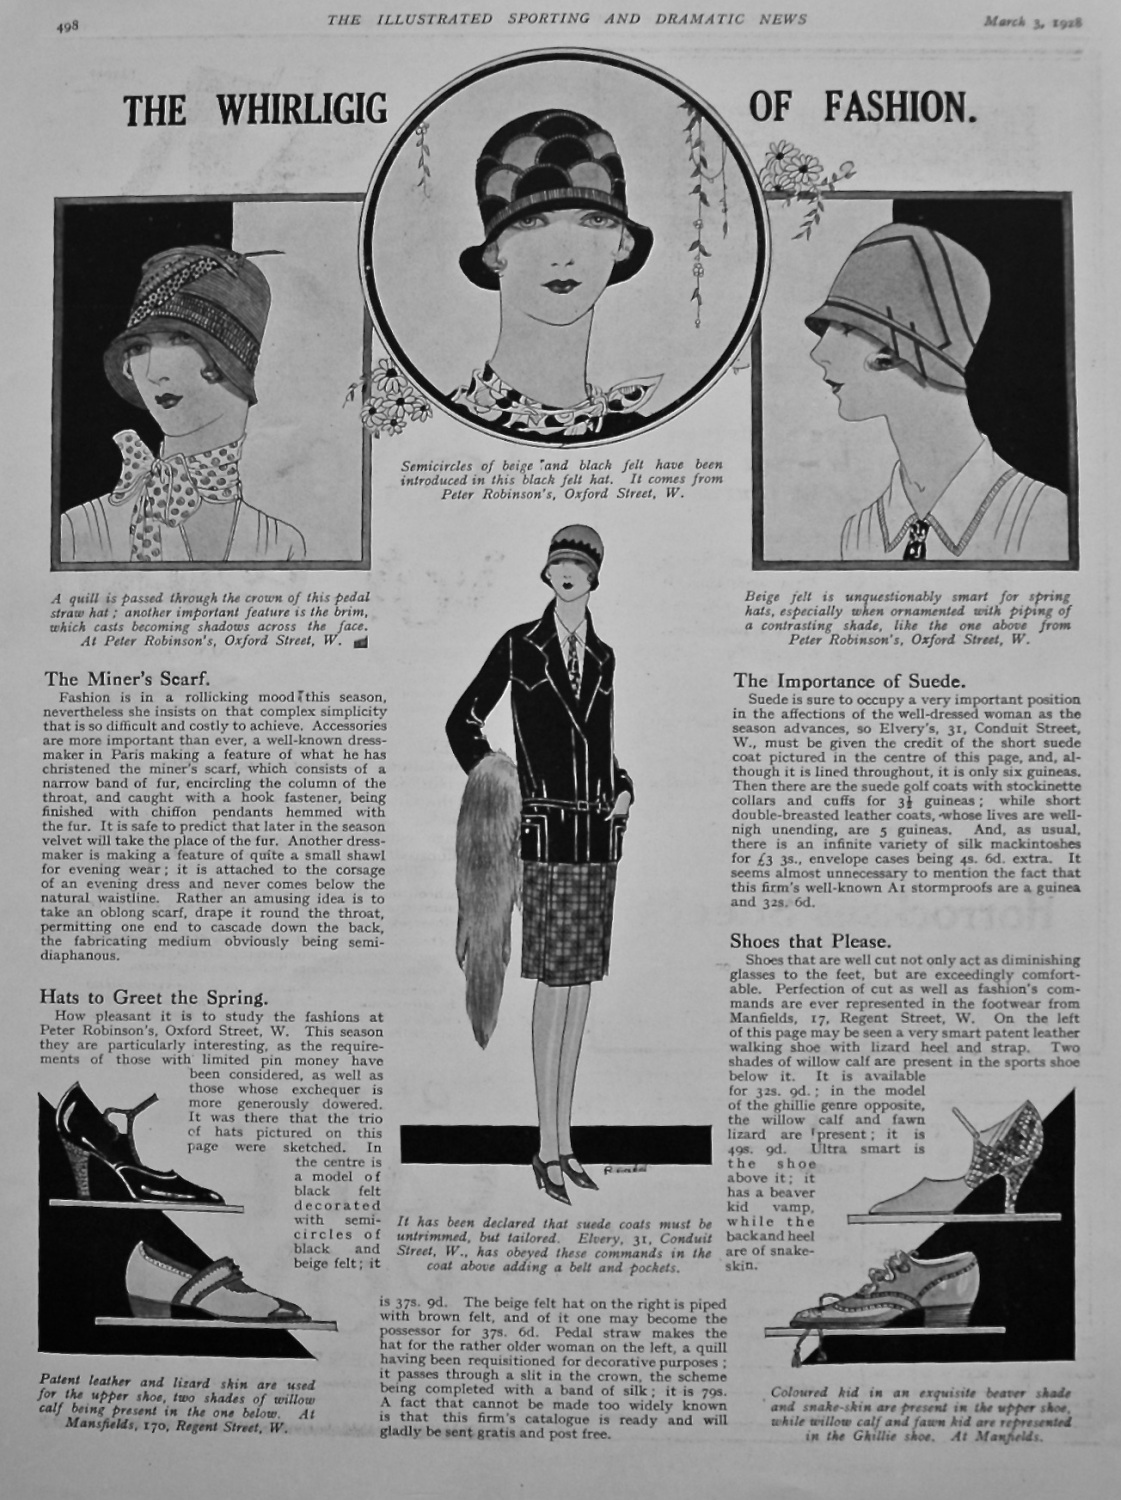 The Whirligig of Fashion. (Fashion Article with Illustrations.) 1928.